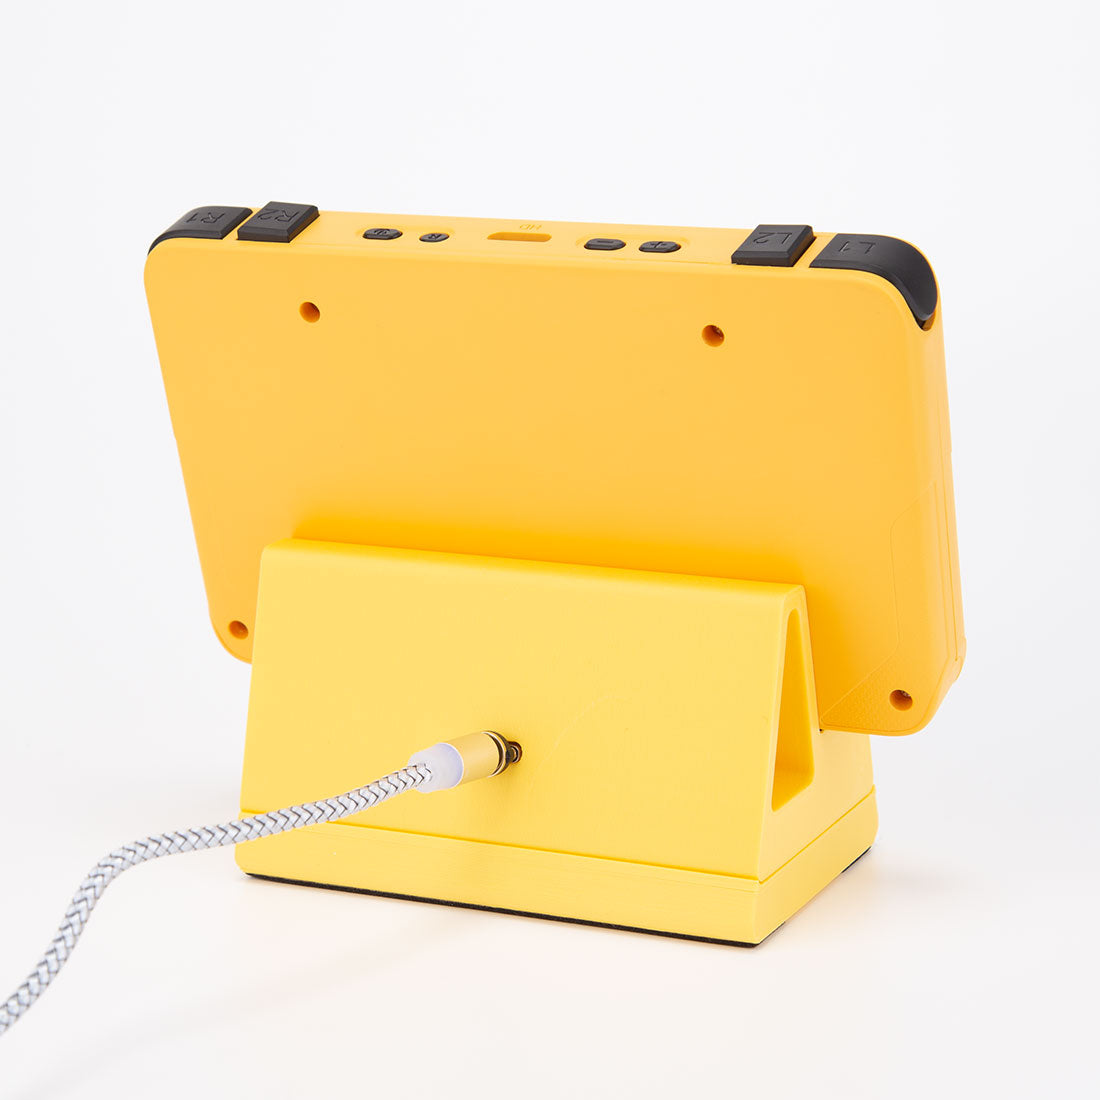 litnxt-3D-printed-magnetic-charging-base-for-rgb30-game-console-yellow-5